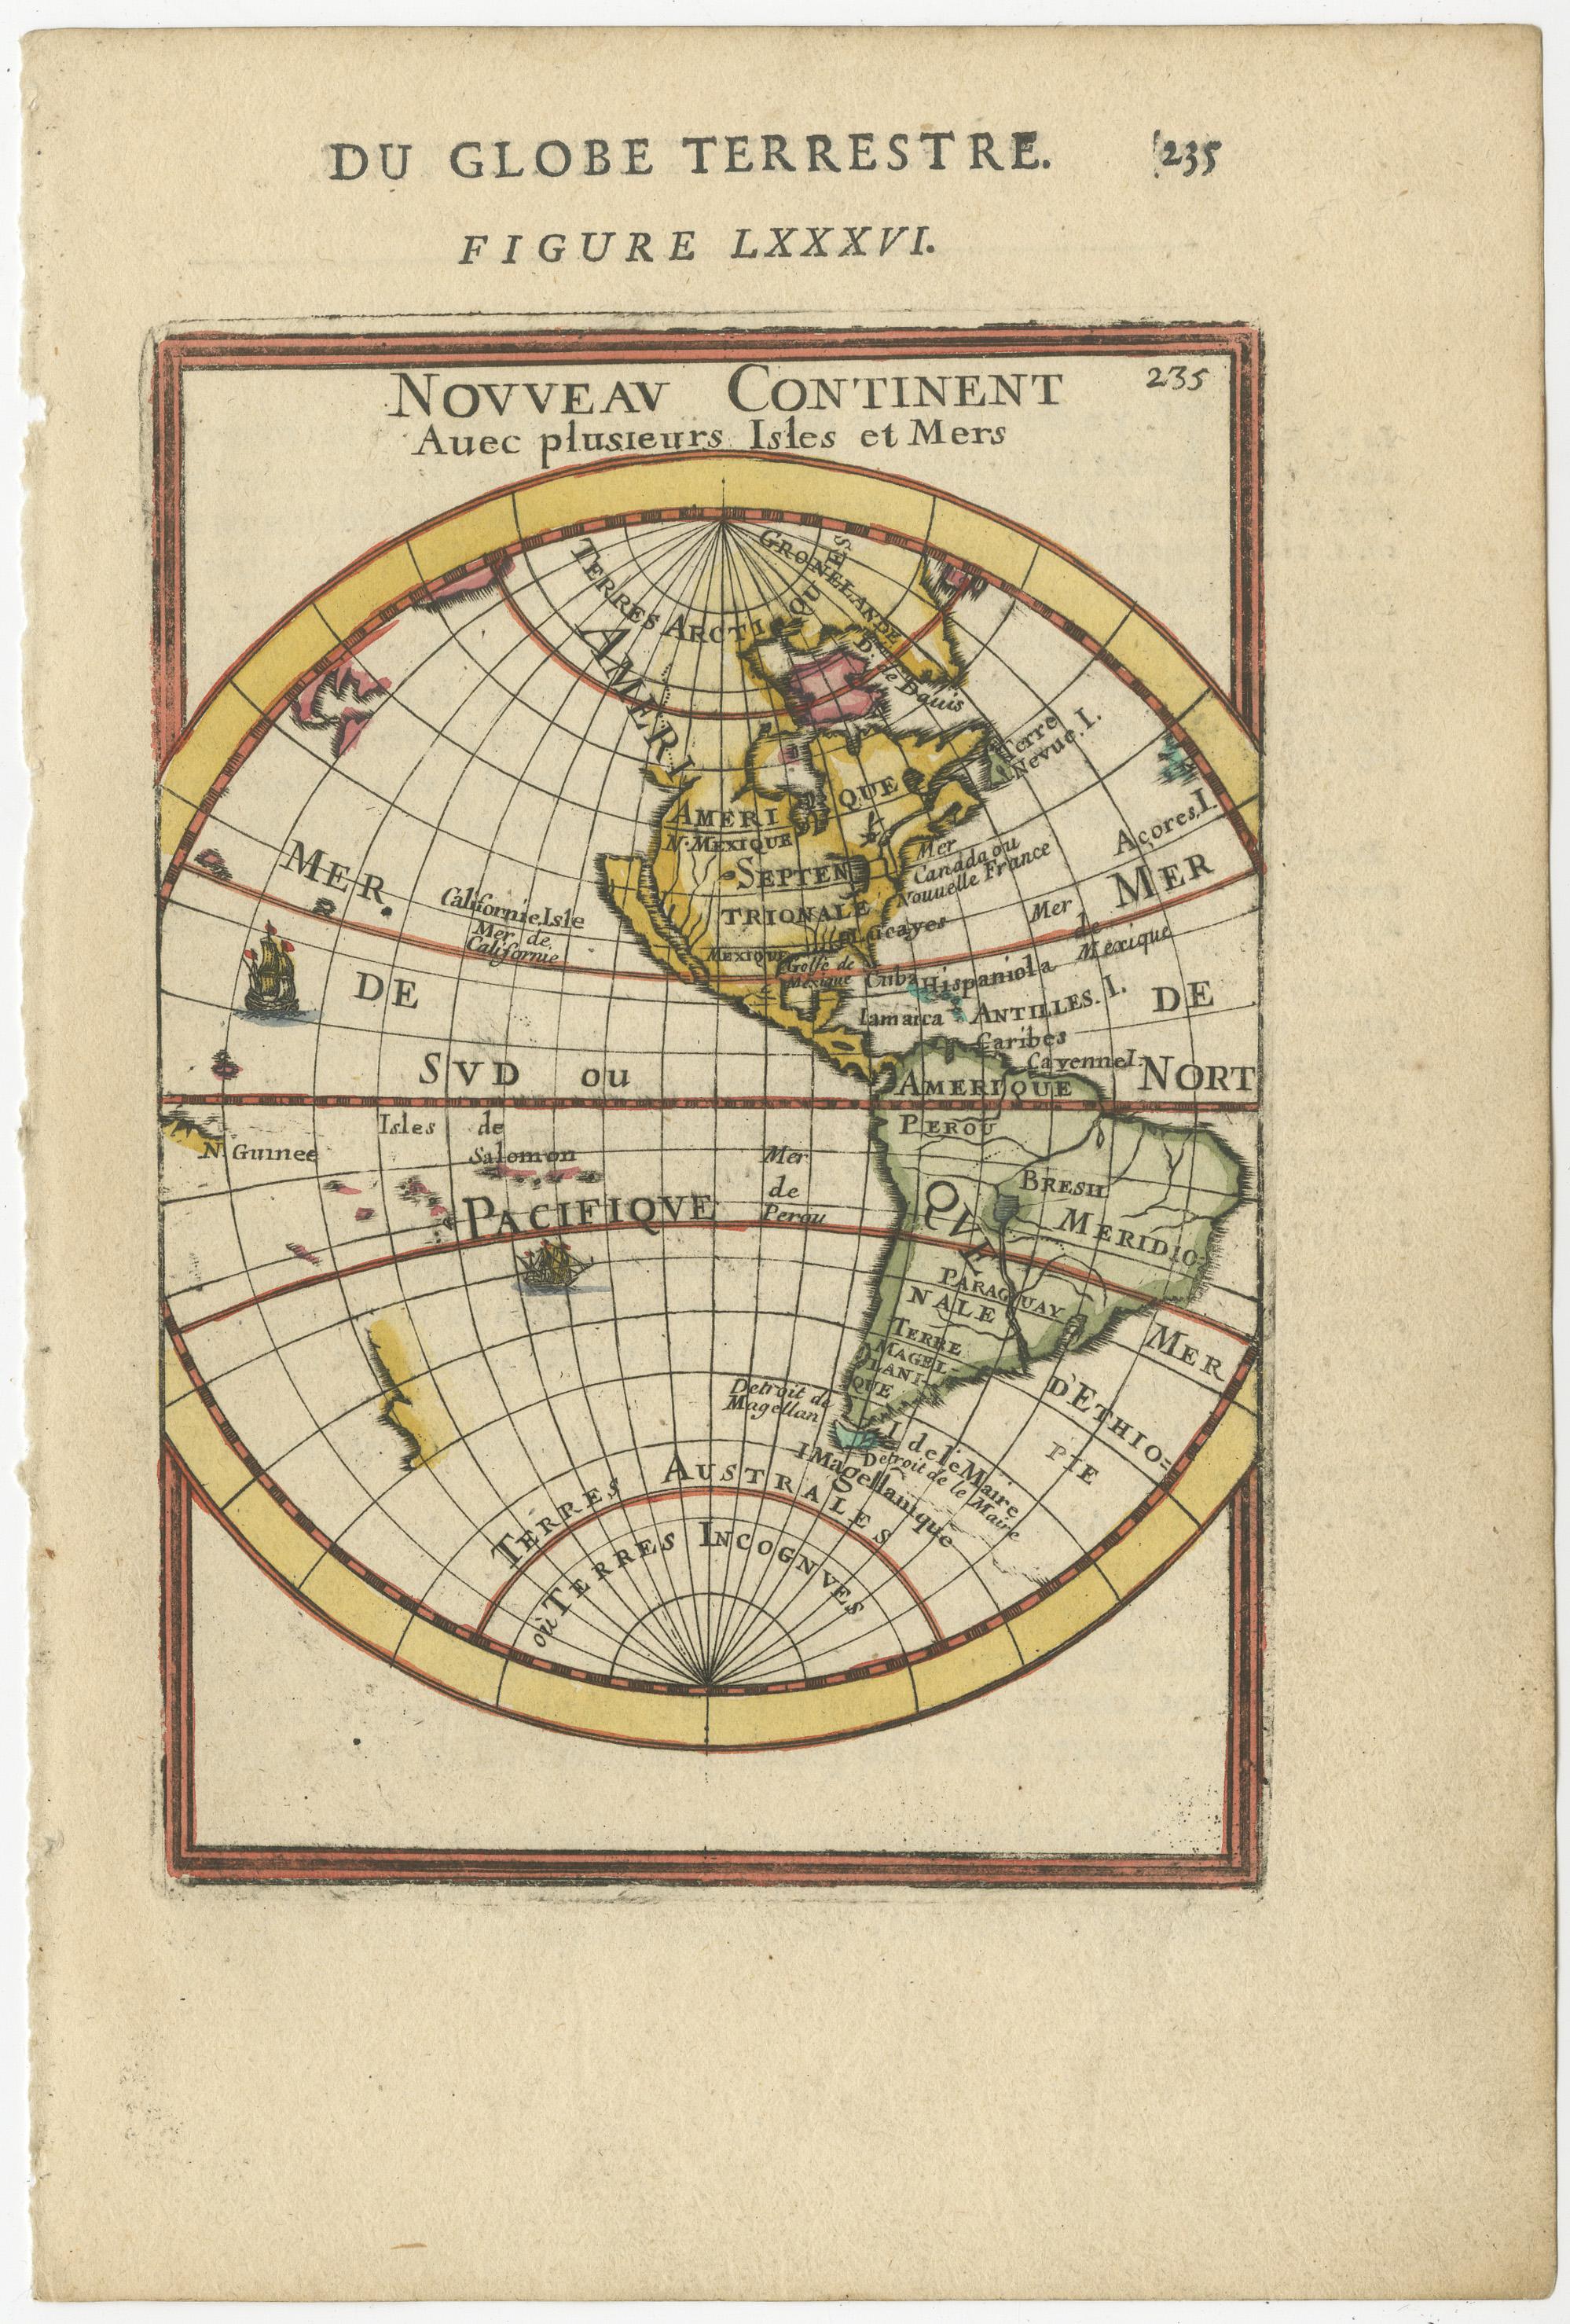 Antique miniature map titled 'Nouveau Continent avec plusieurs Isles et Mers'. Decorative map of the Western Hemisphere, published by Alain Manesson Mallet. The map shows California as an Island, no Northwest Coast of America and an incomplete New